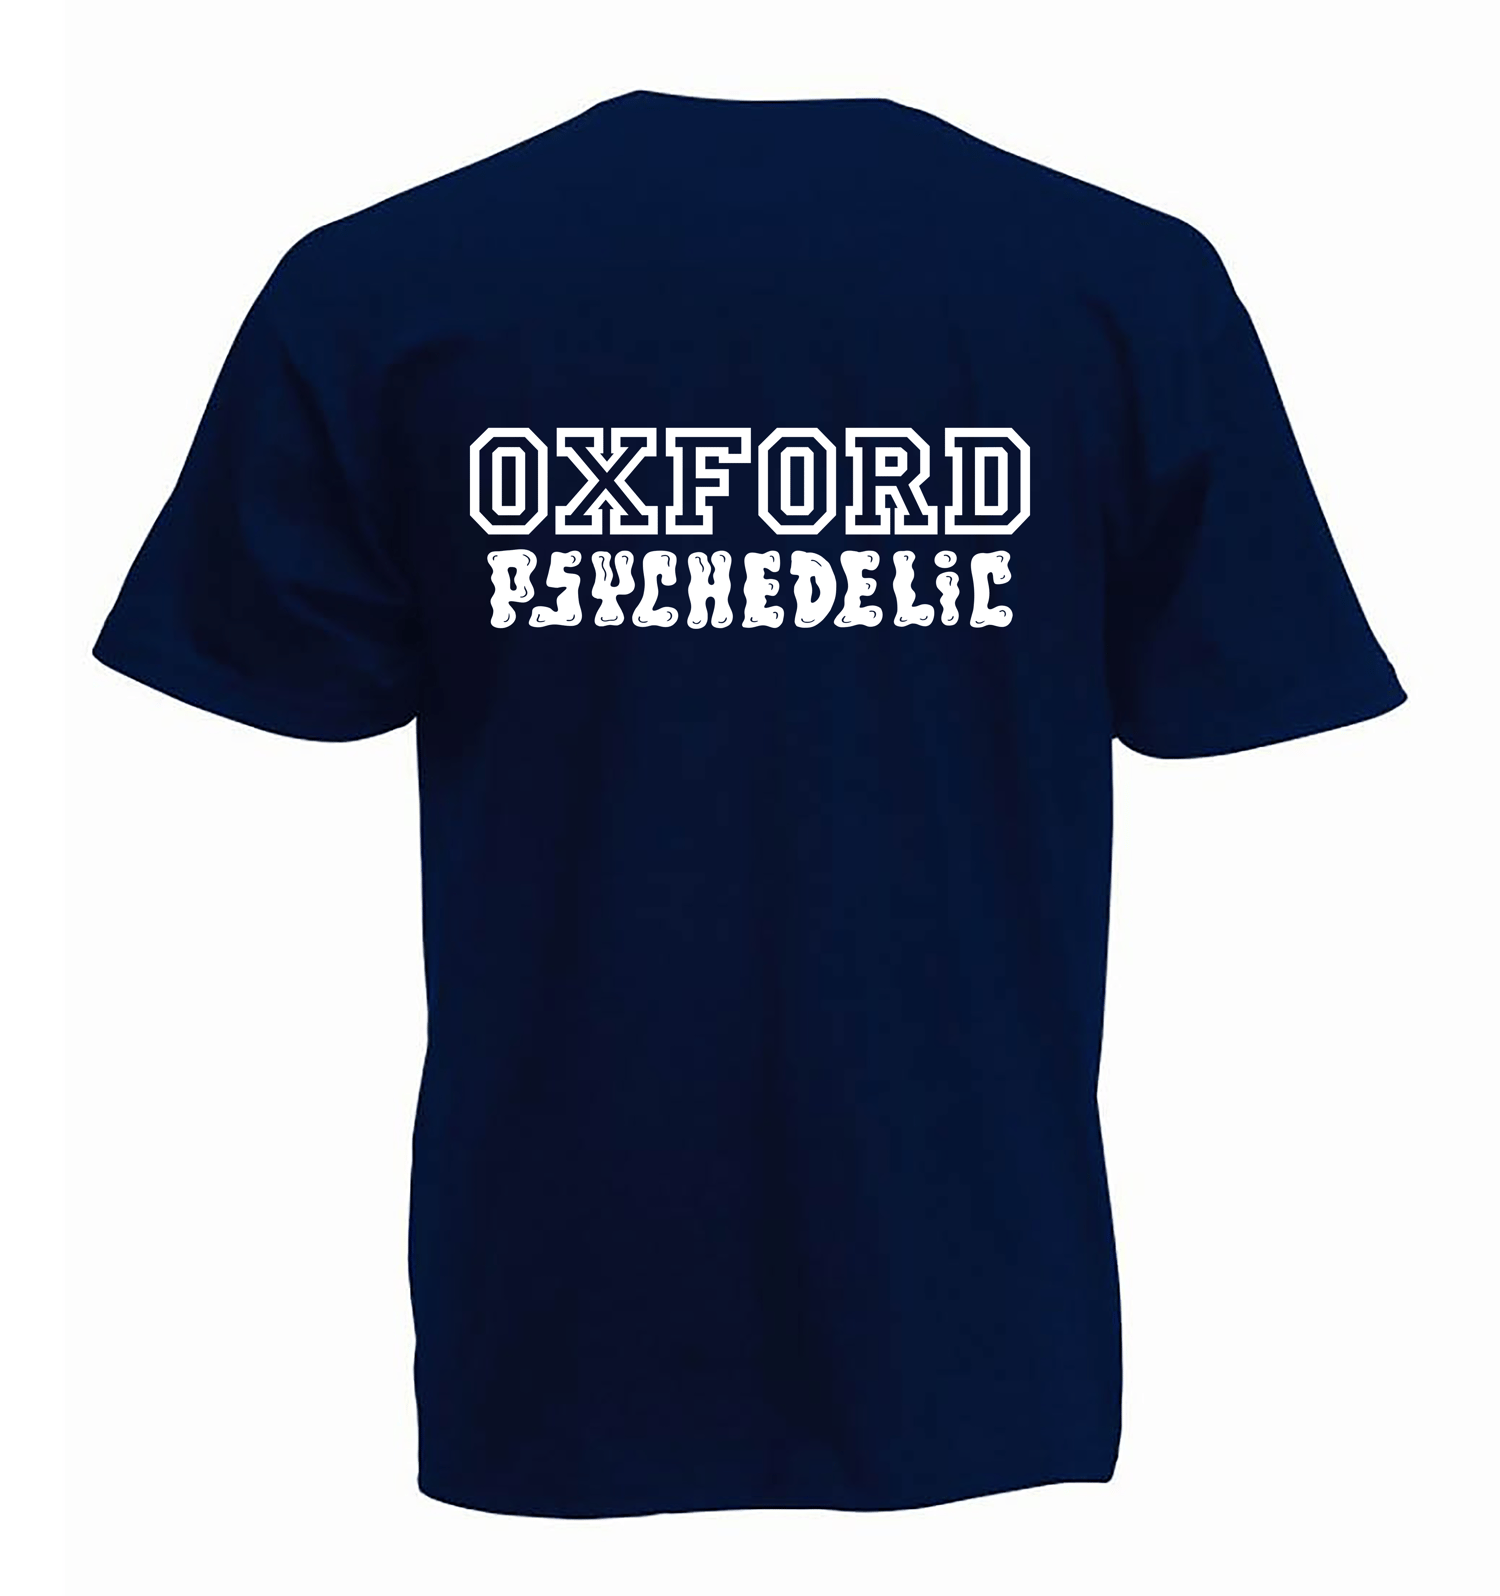 Image of Pre-order freshers varsity unisex classic jersey t-shirt navy (certified organic cotton)